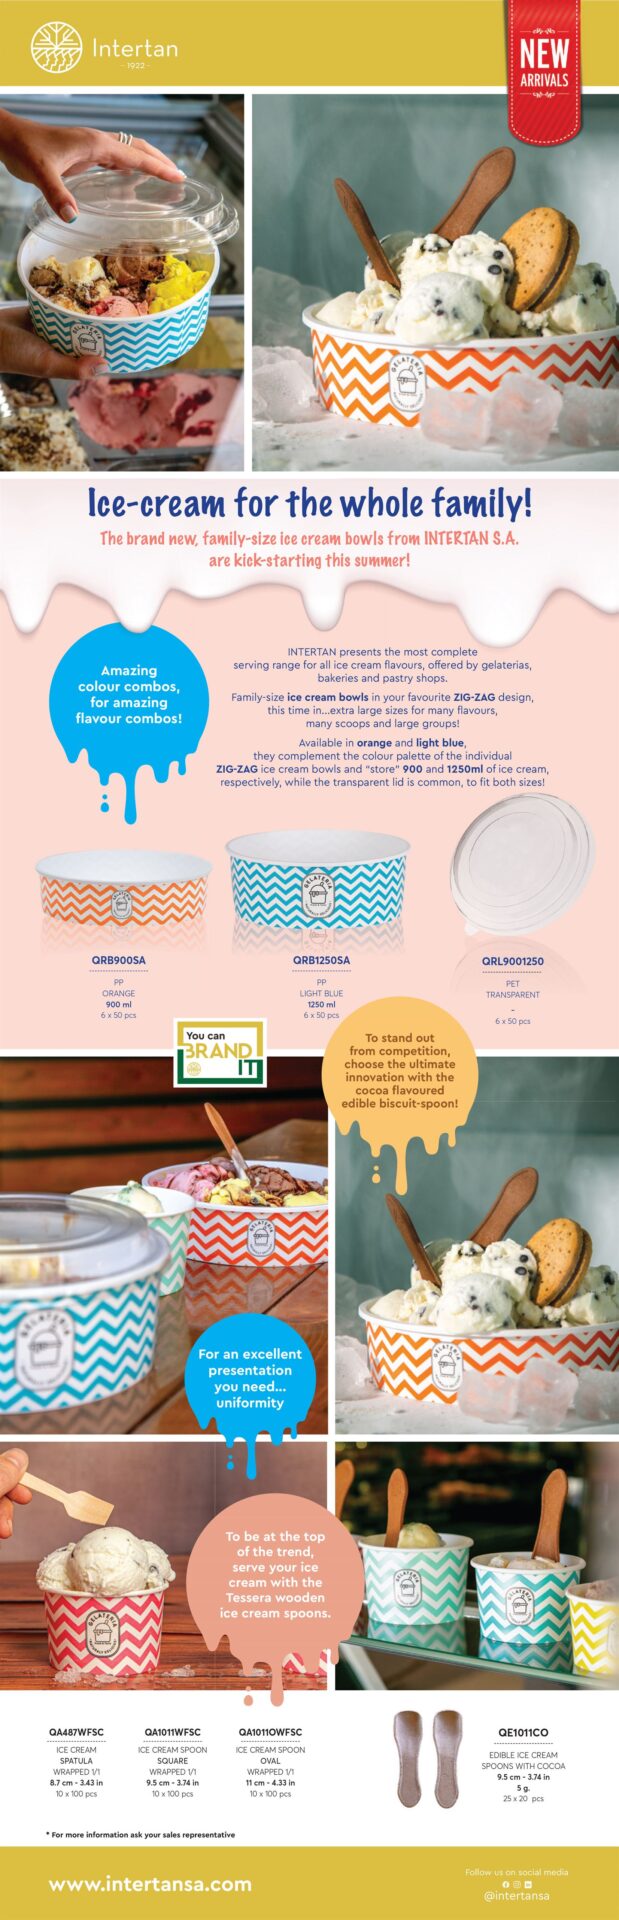 New Family-size Ice Cream Bowls Newsletter | Intertan S.A.